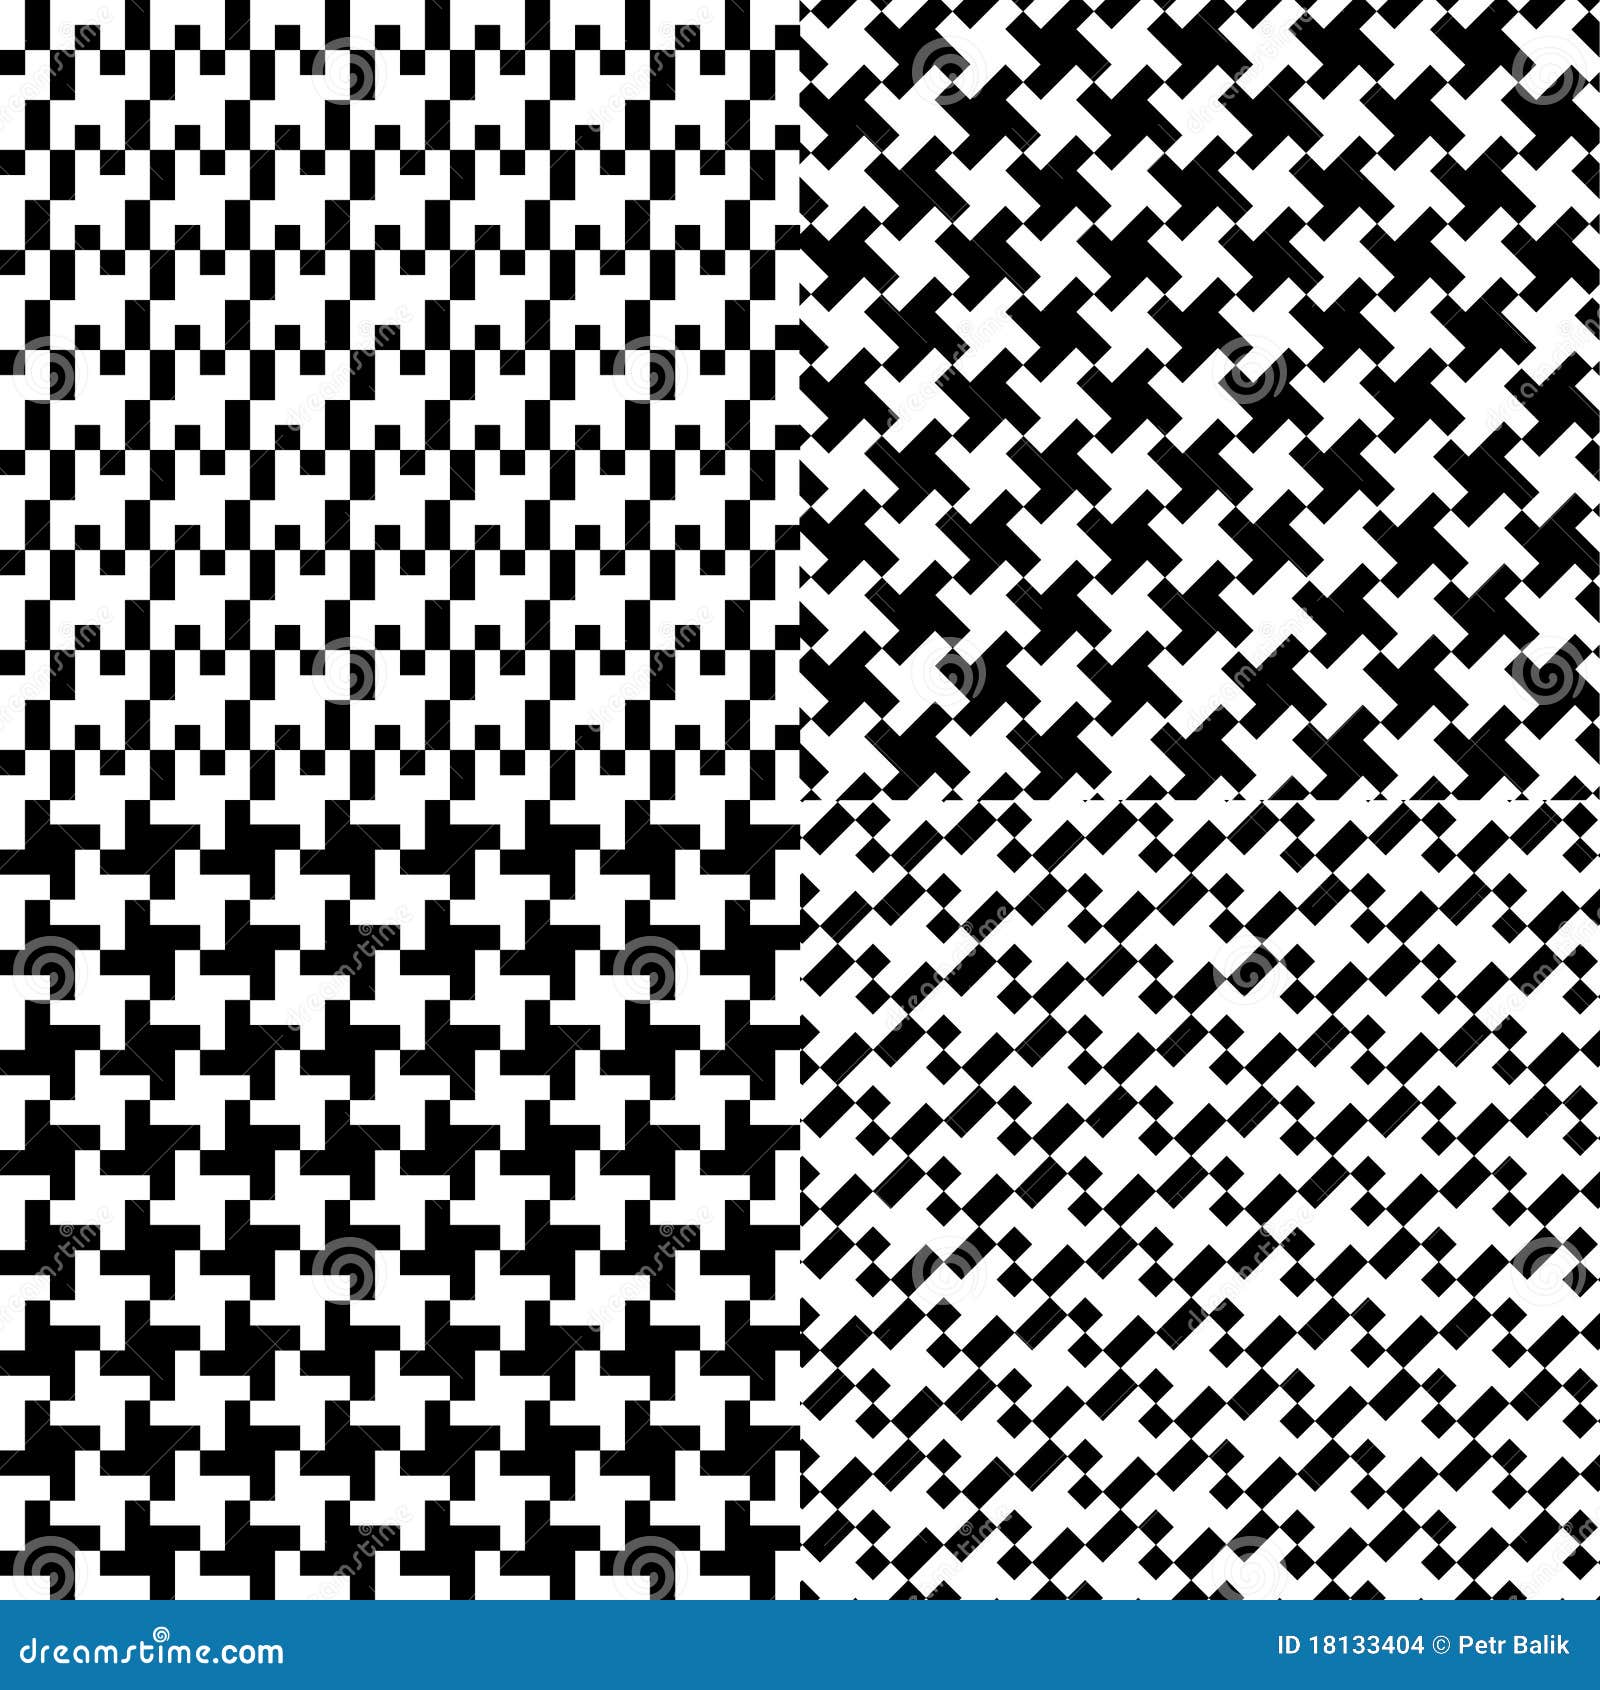 Houndstooth Seamless Repeat in Photoshop — Another Digital Fabric Weave